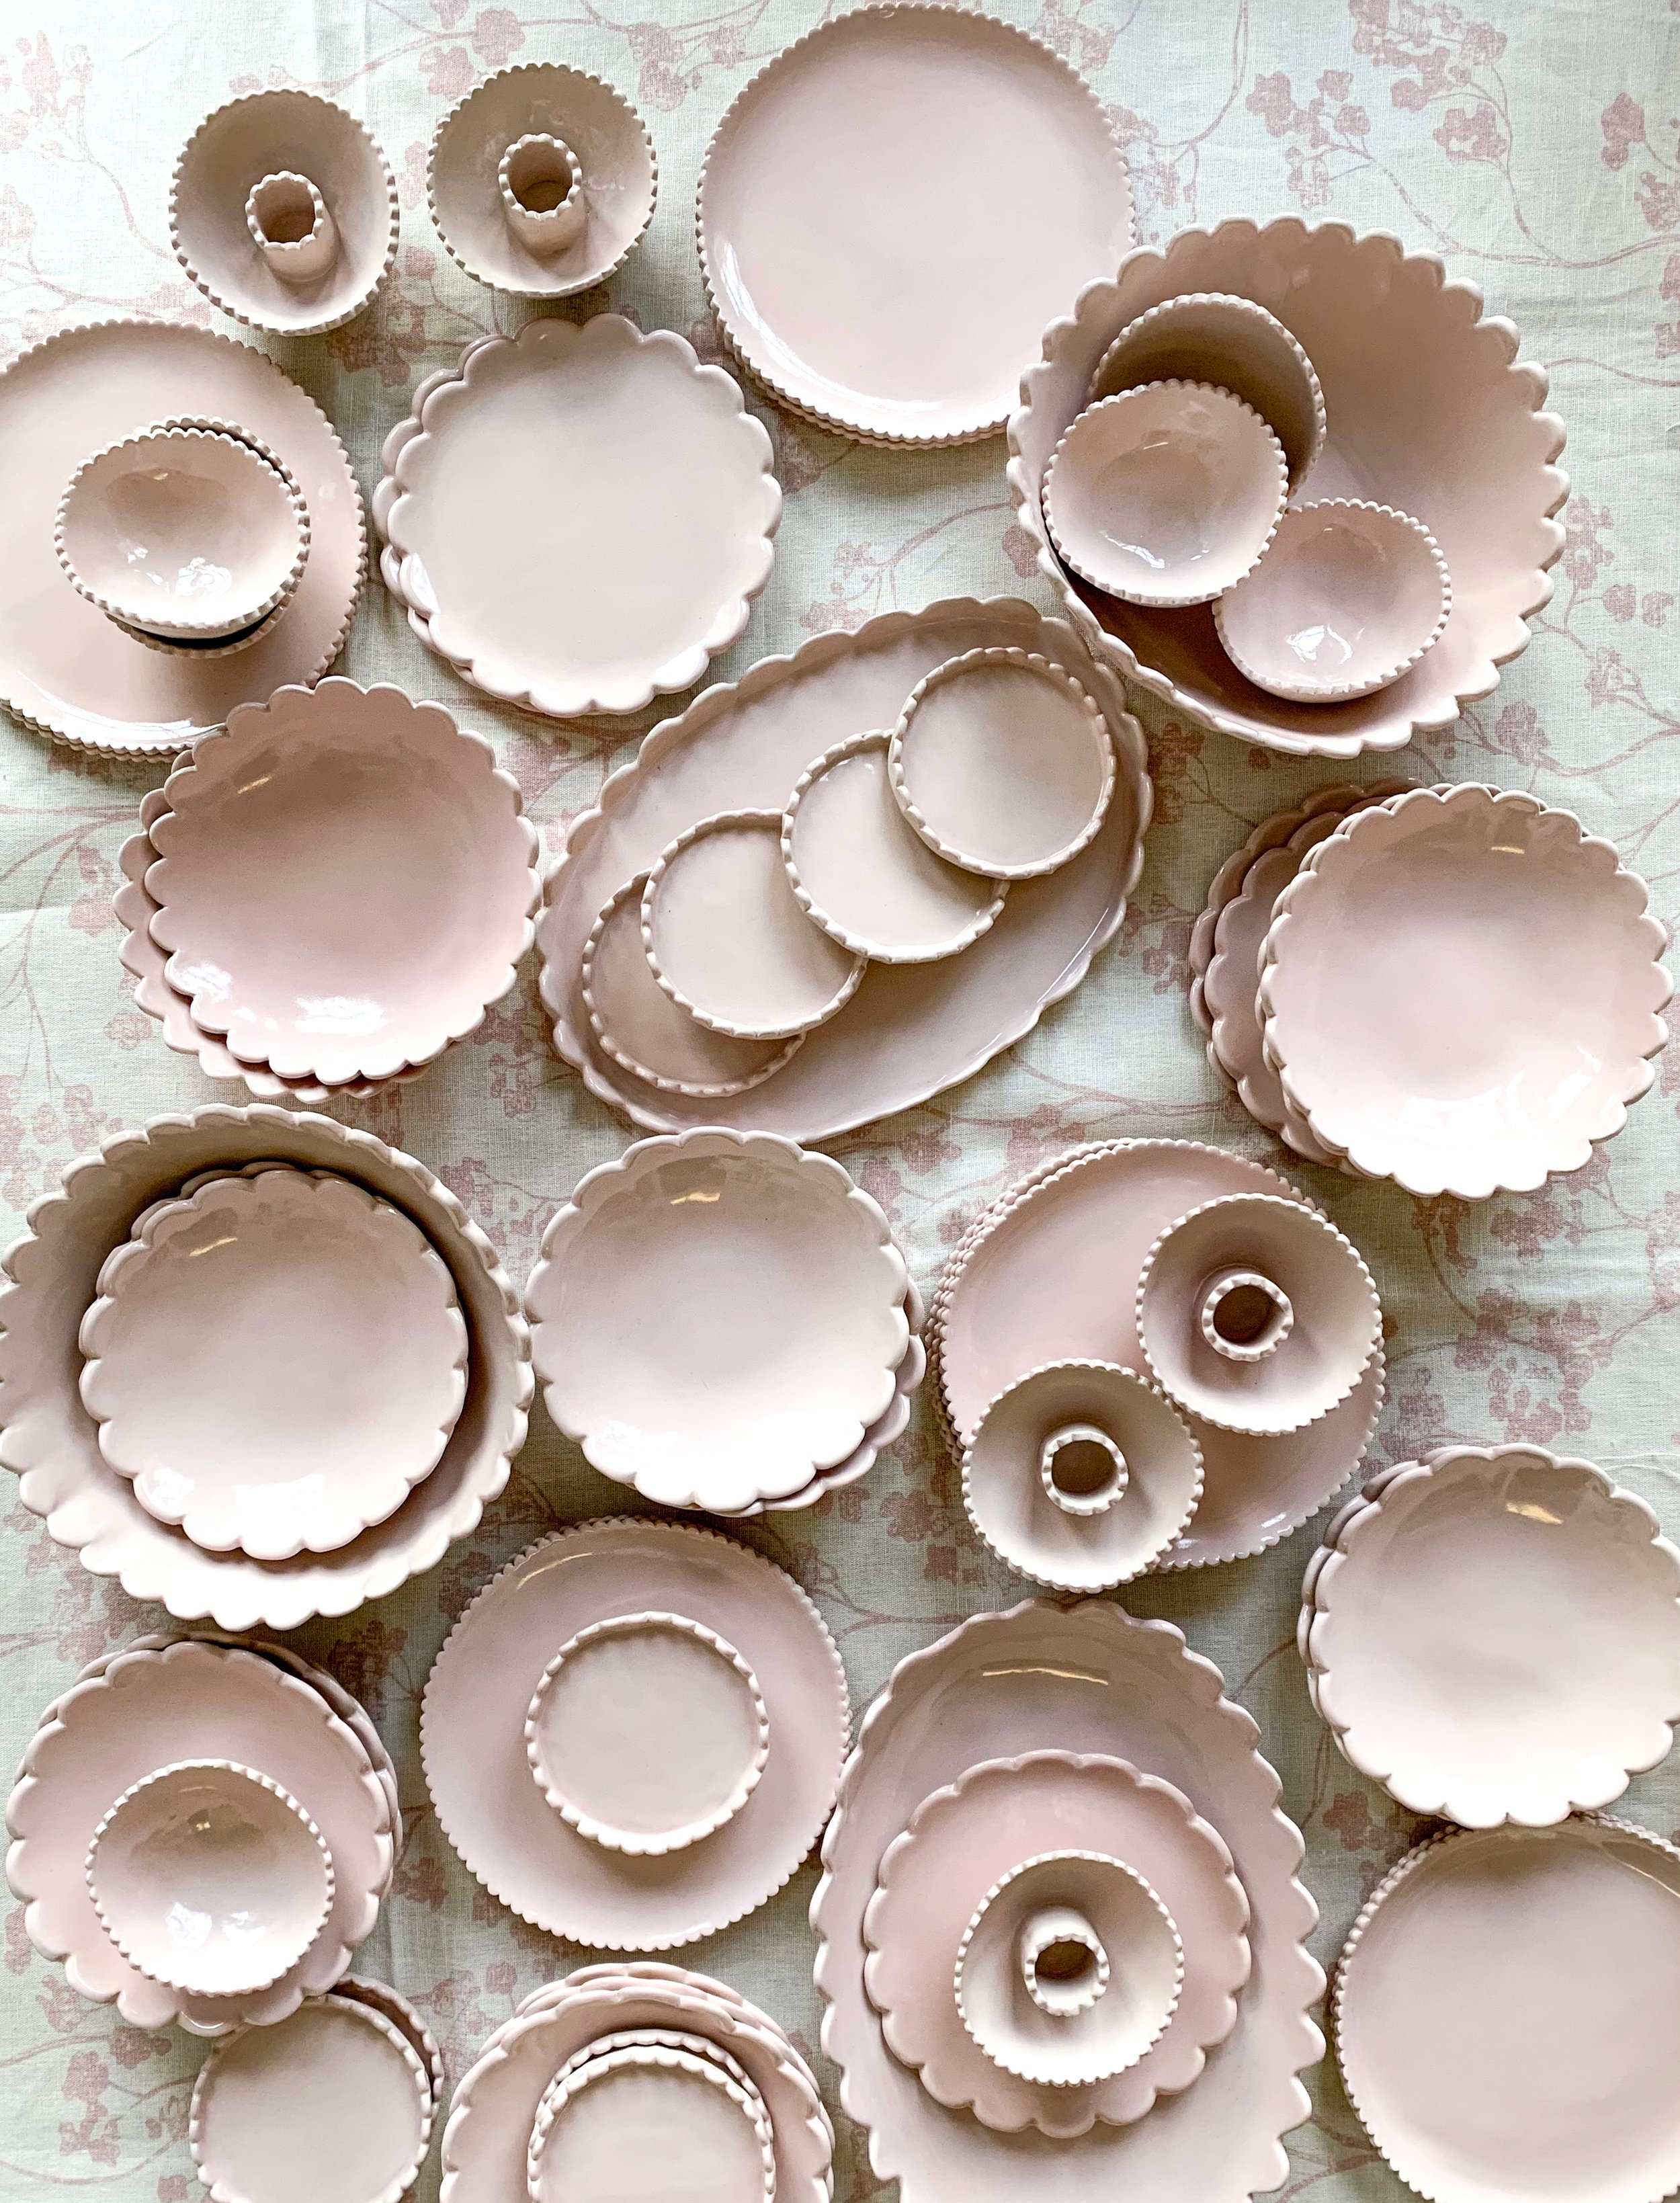 Pink scalloped plates and bowls by Karin Hassock Ceramics